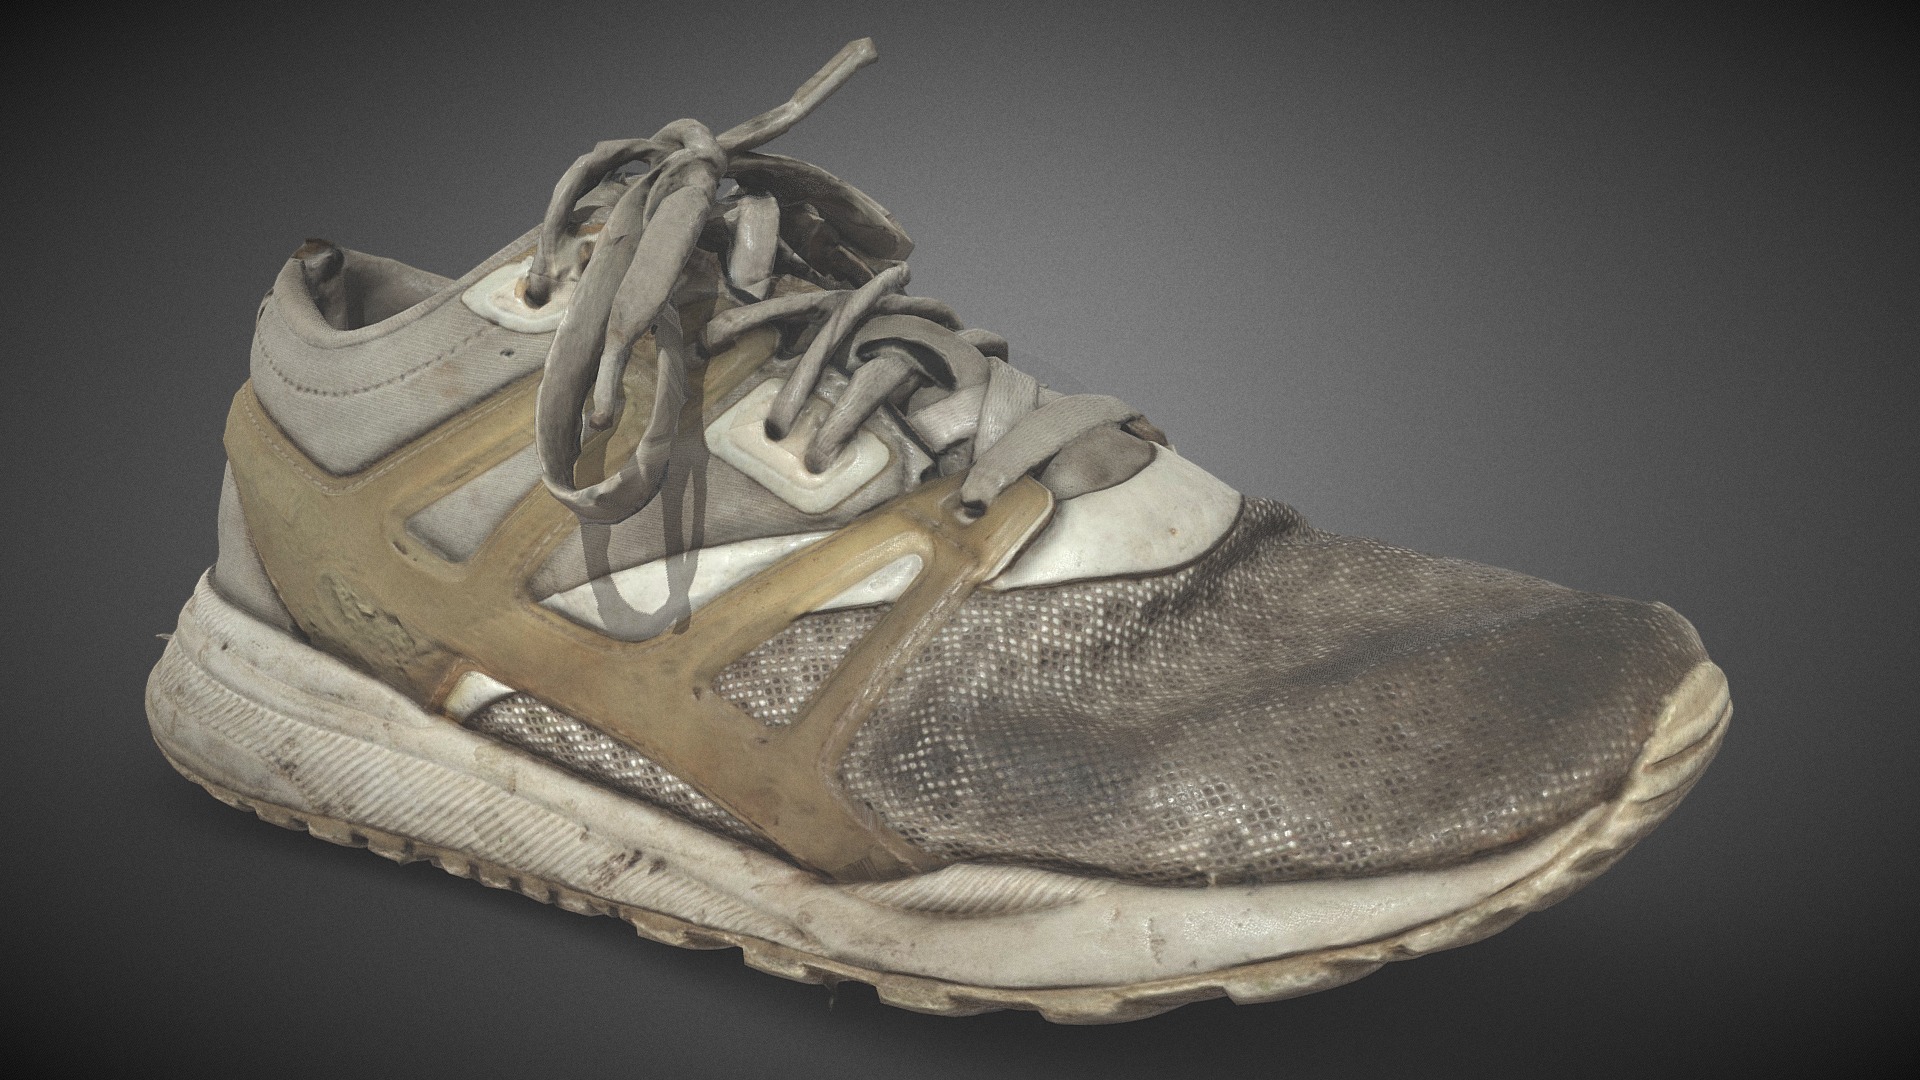 3D model Reebok Ventilator damaged shoe - This is a 3D model of the Reebok Ventilator damaged shoe. The 3D model is about a close-up of a shoe.